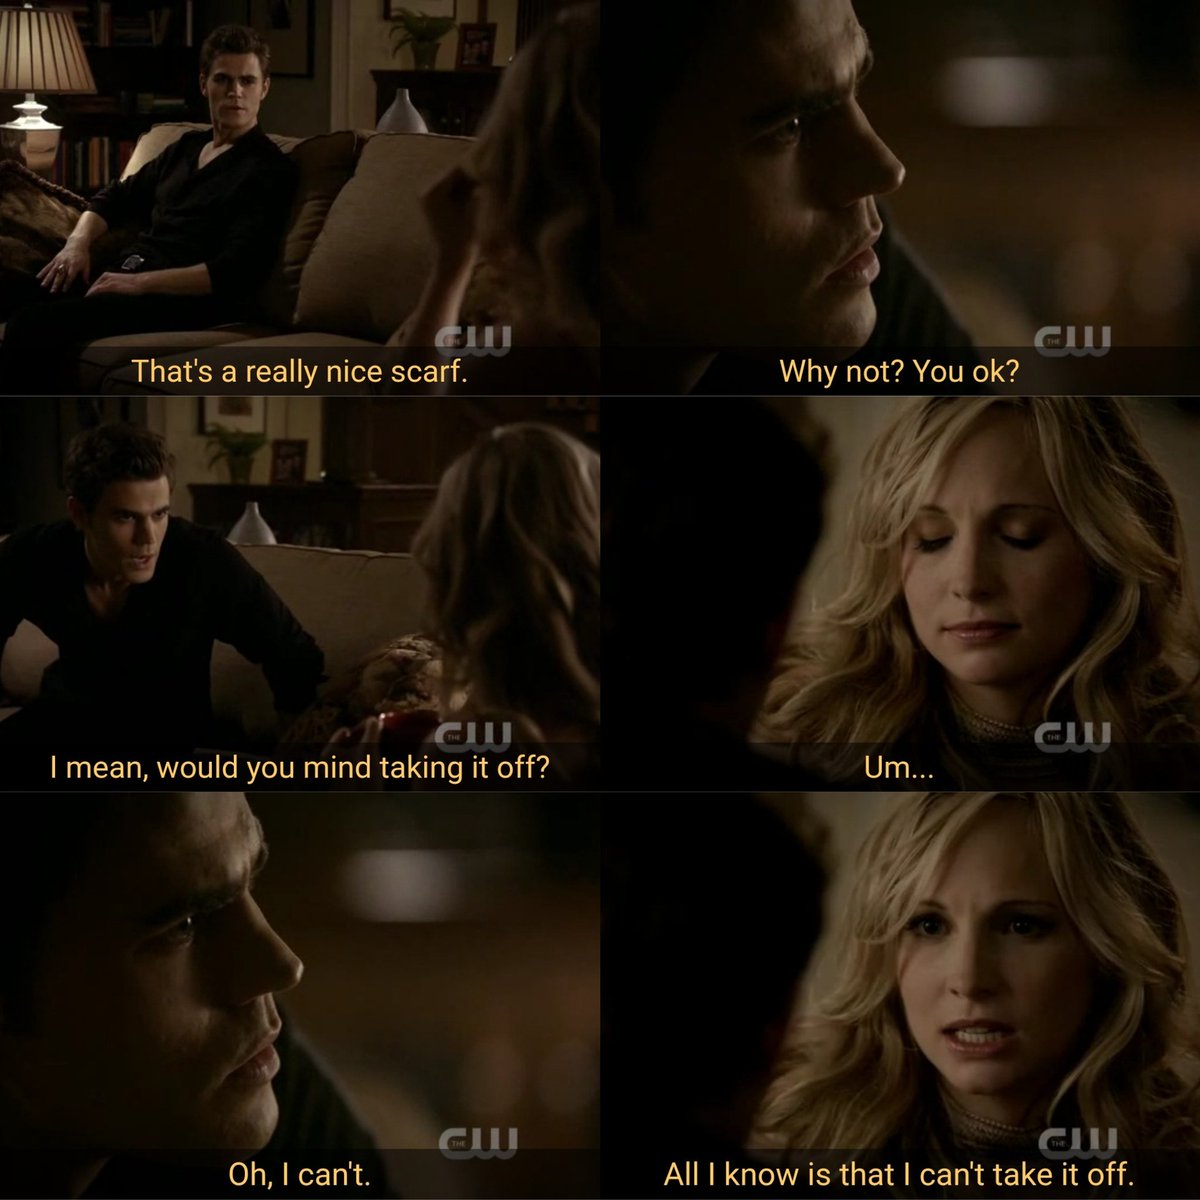 the same's always repeated. caroline's compelled not to take off her scarf but when damon asks her to go to the kitchen she refuses and he has to use compulsion again because SHE'S NOT COMPELLED TO DO WHATEVER HE WANTS